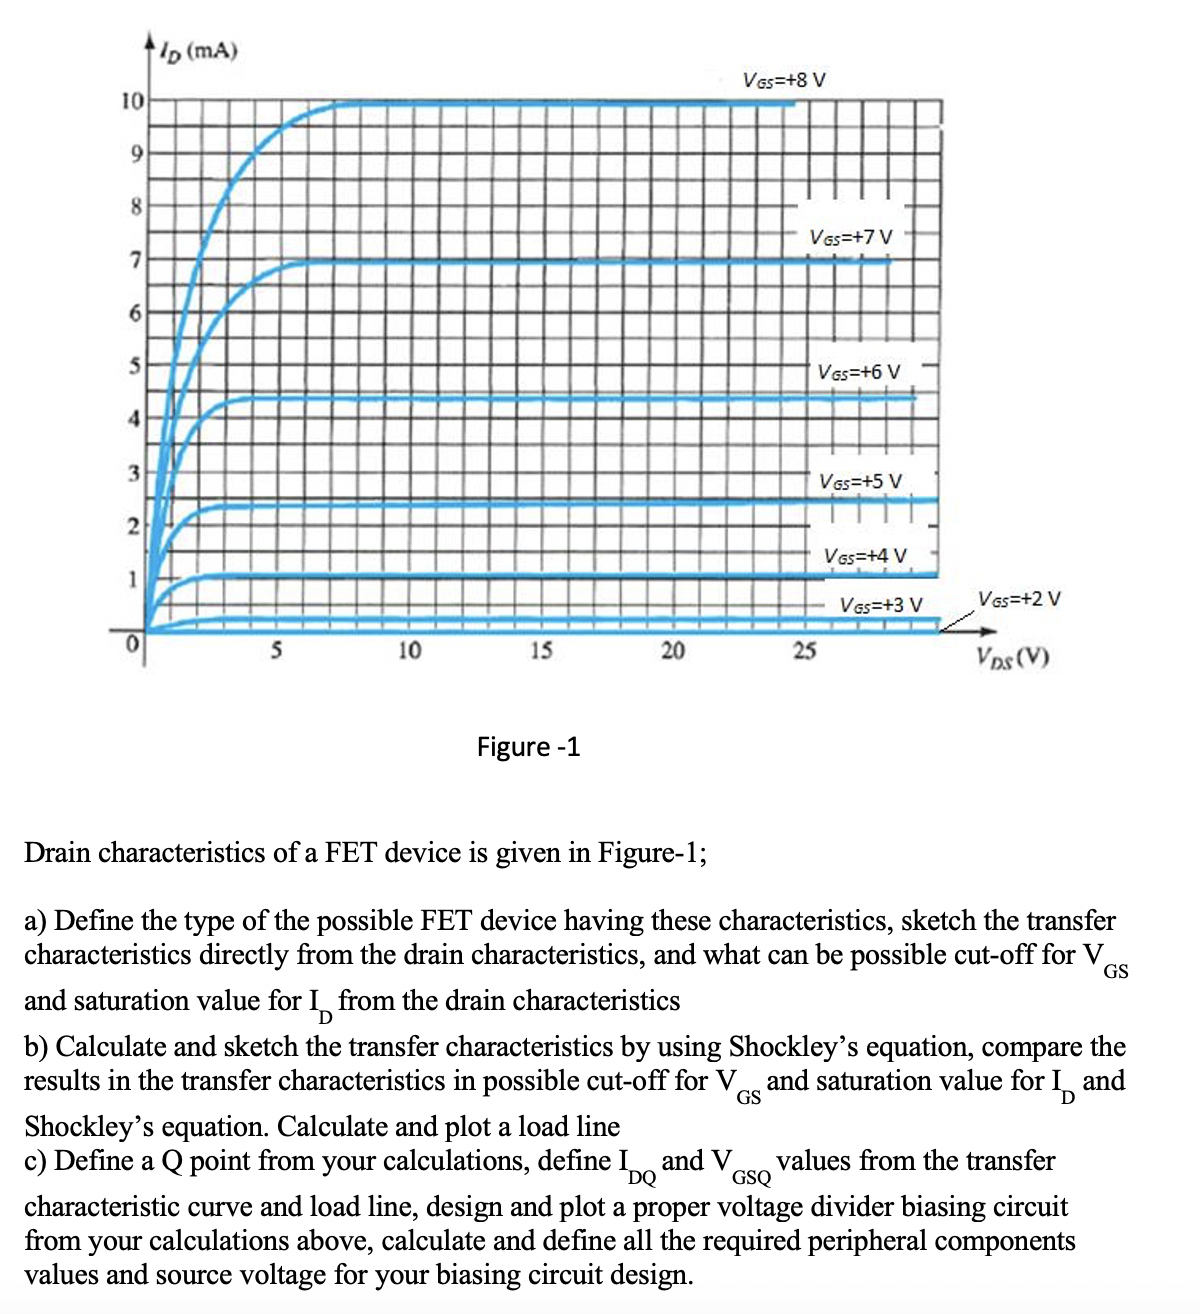 (mA)
Vas=+8 V
10
9
Vas=+7 V
7
Ves=+6 V
Vas=+5 V
Ves=+4 V
1
Ves=+3 V
Vas=+2 V
5
10
15 20 25
Vps (V)
Figure -1
Drain characteristics of a FET device is given in Figure-1;
a) Define the type of the possible FET device having these characteristics, sketch the transfer
characteristics directly from the drain characteristics, and what can be possible cut-off for V
GS
and saturation value for I from the drain characteristics
b) Calculate and sketch the transfer characteristics by using Shockley's equation, compare the
results in the transfer characteristics in possible cut-off for V and saturation value for I and
GS
Shockley's equation. Calculate and plot a load line
c) Define a Q point from your calculations, define Io
and V
values from the transfer
GSQ
characteristic curve and load line, design and plot a proper voltage divider biasing circuit
from your calculations above, calculate and define all the required peripheral components
values and source voltage for your biasing circuit design.
